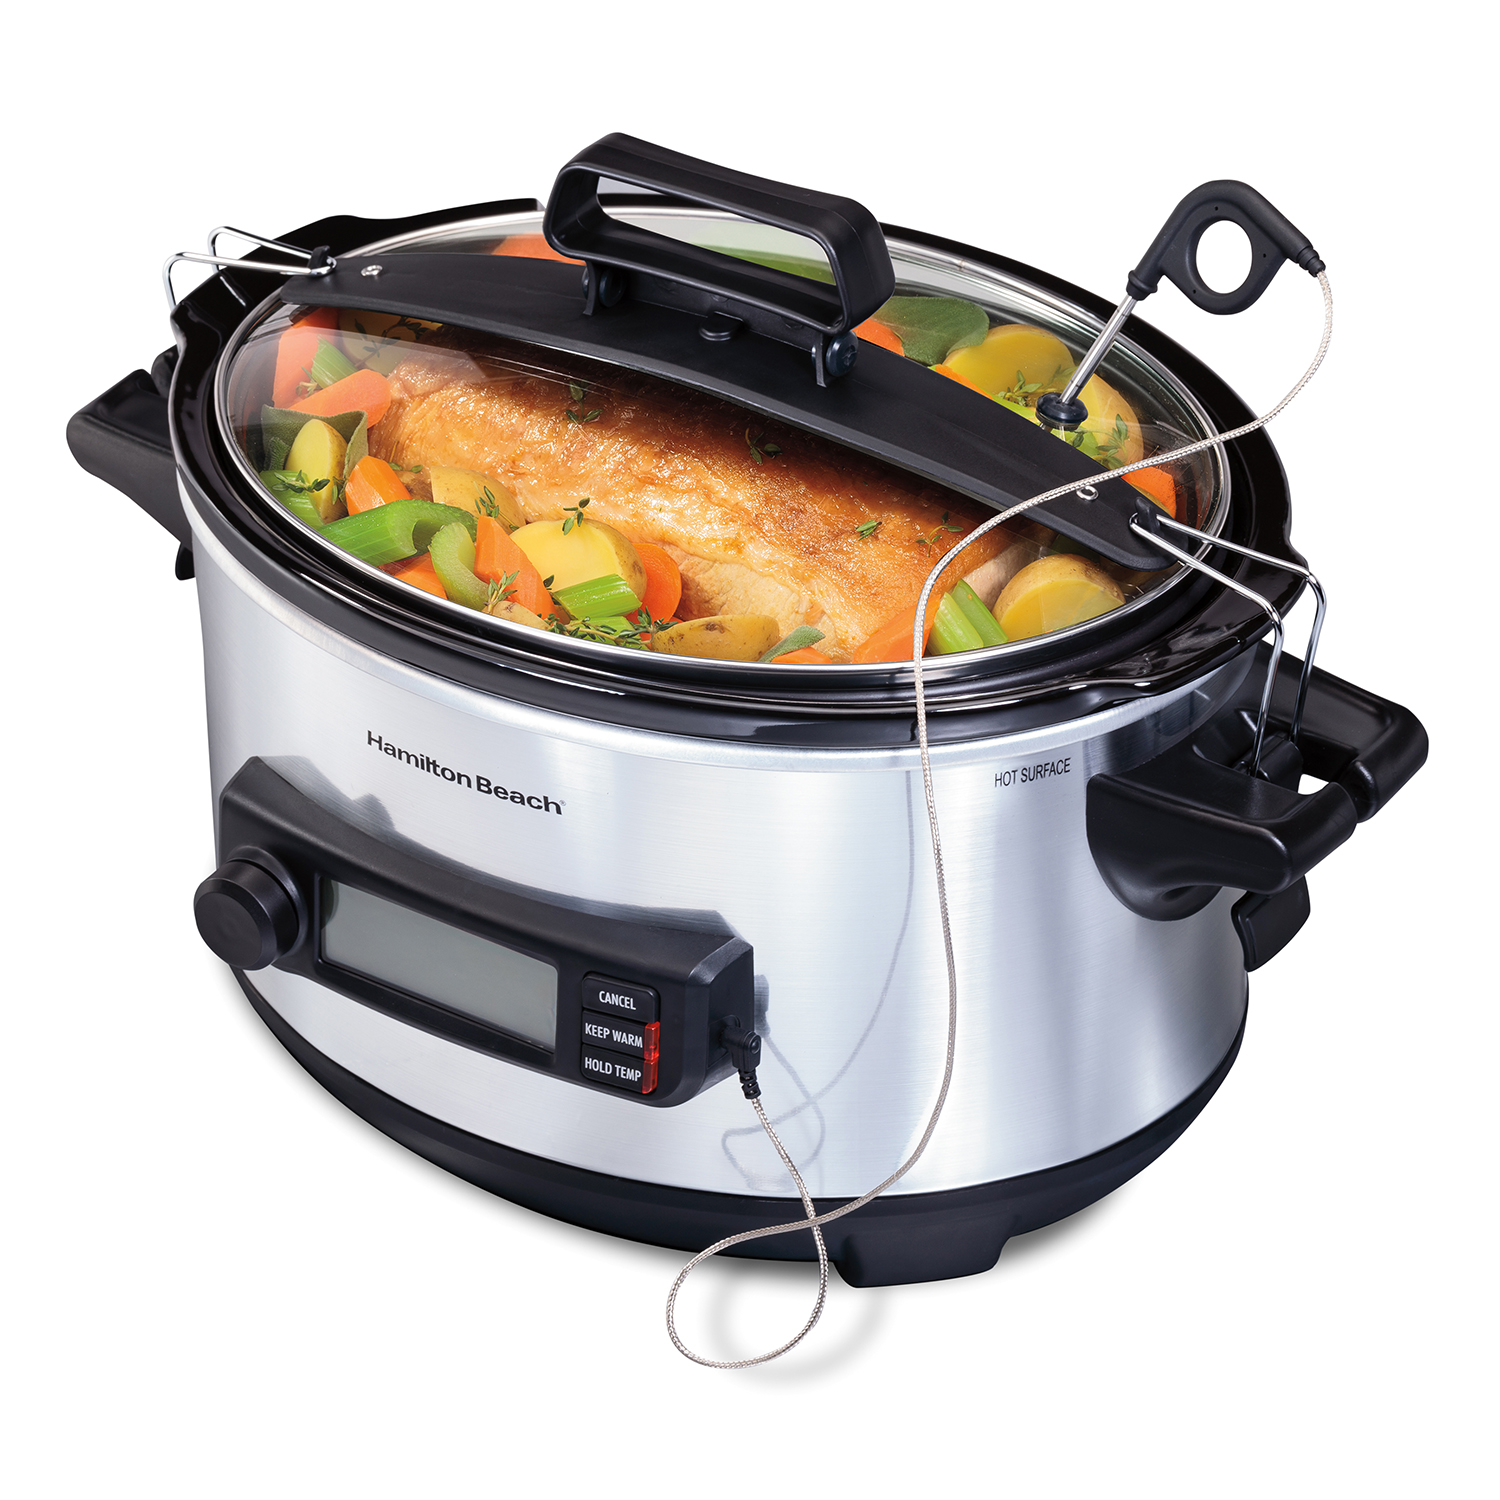 Enter for a Chance to Win a Hamilton Beach® Slow Cooker